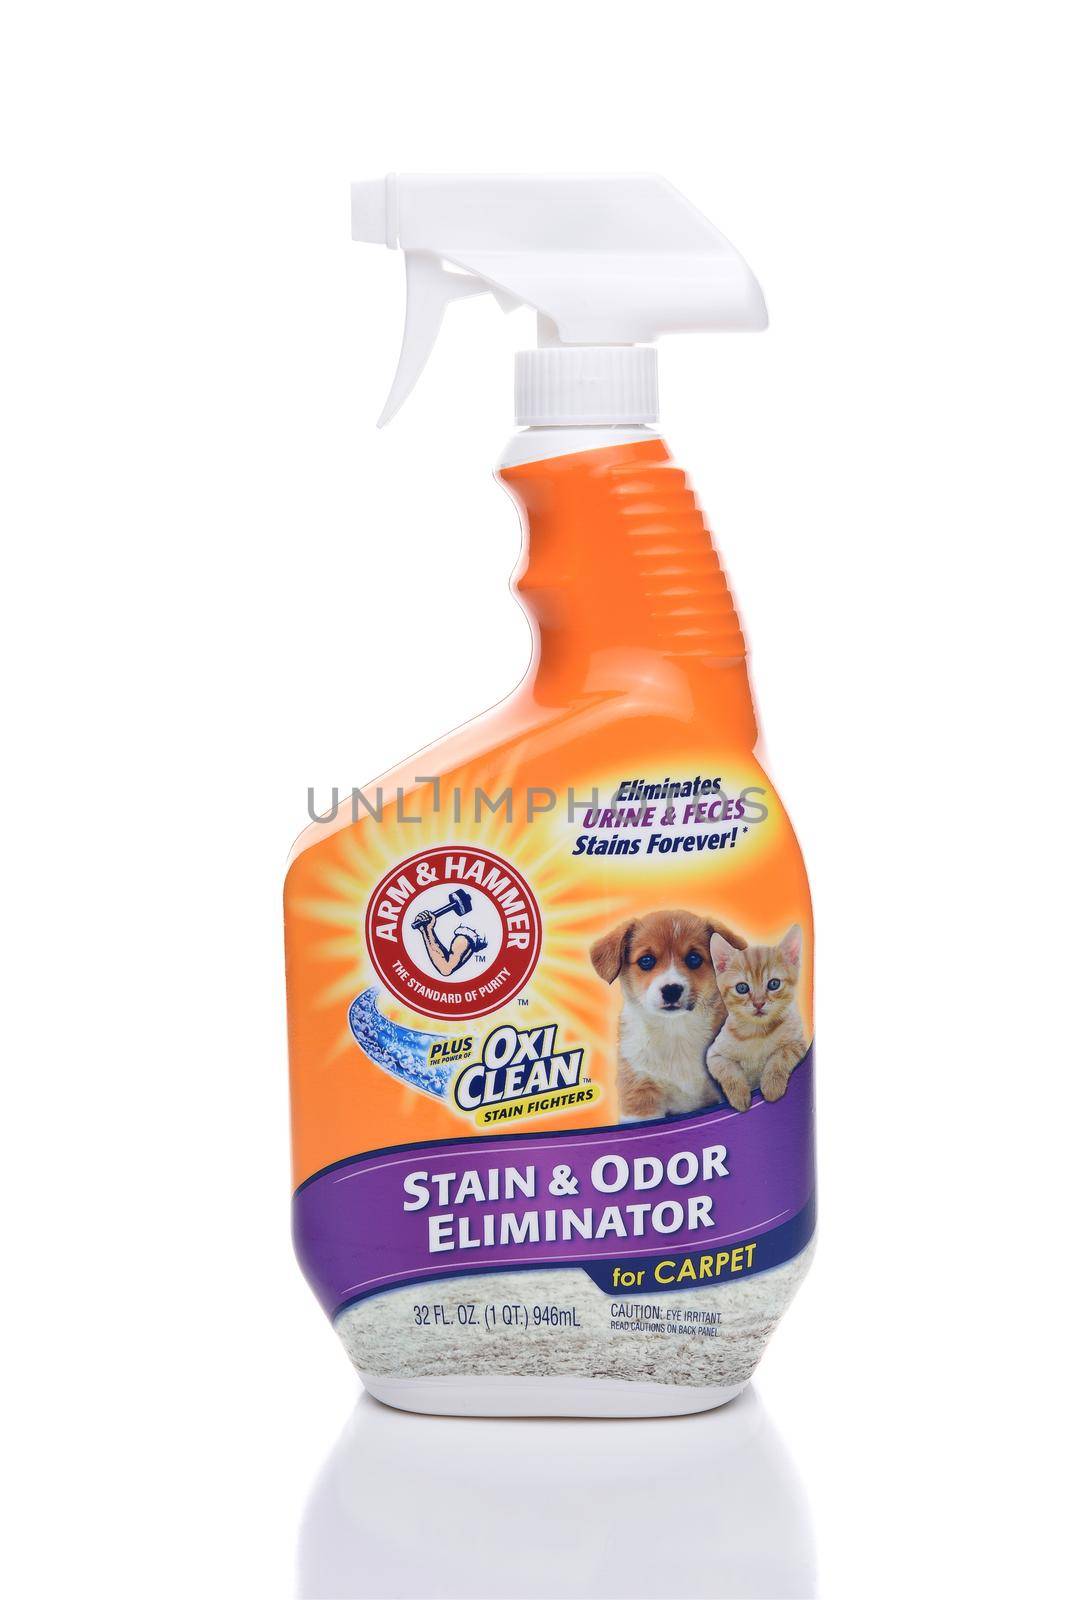 Arm and Hammer Stain Odor Remover by sCukrov